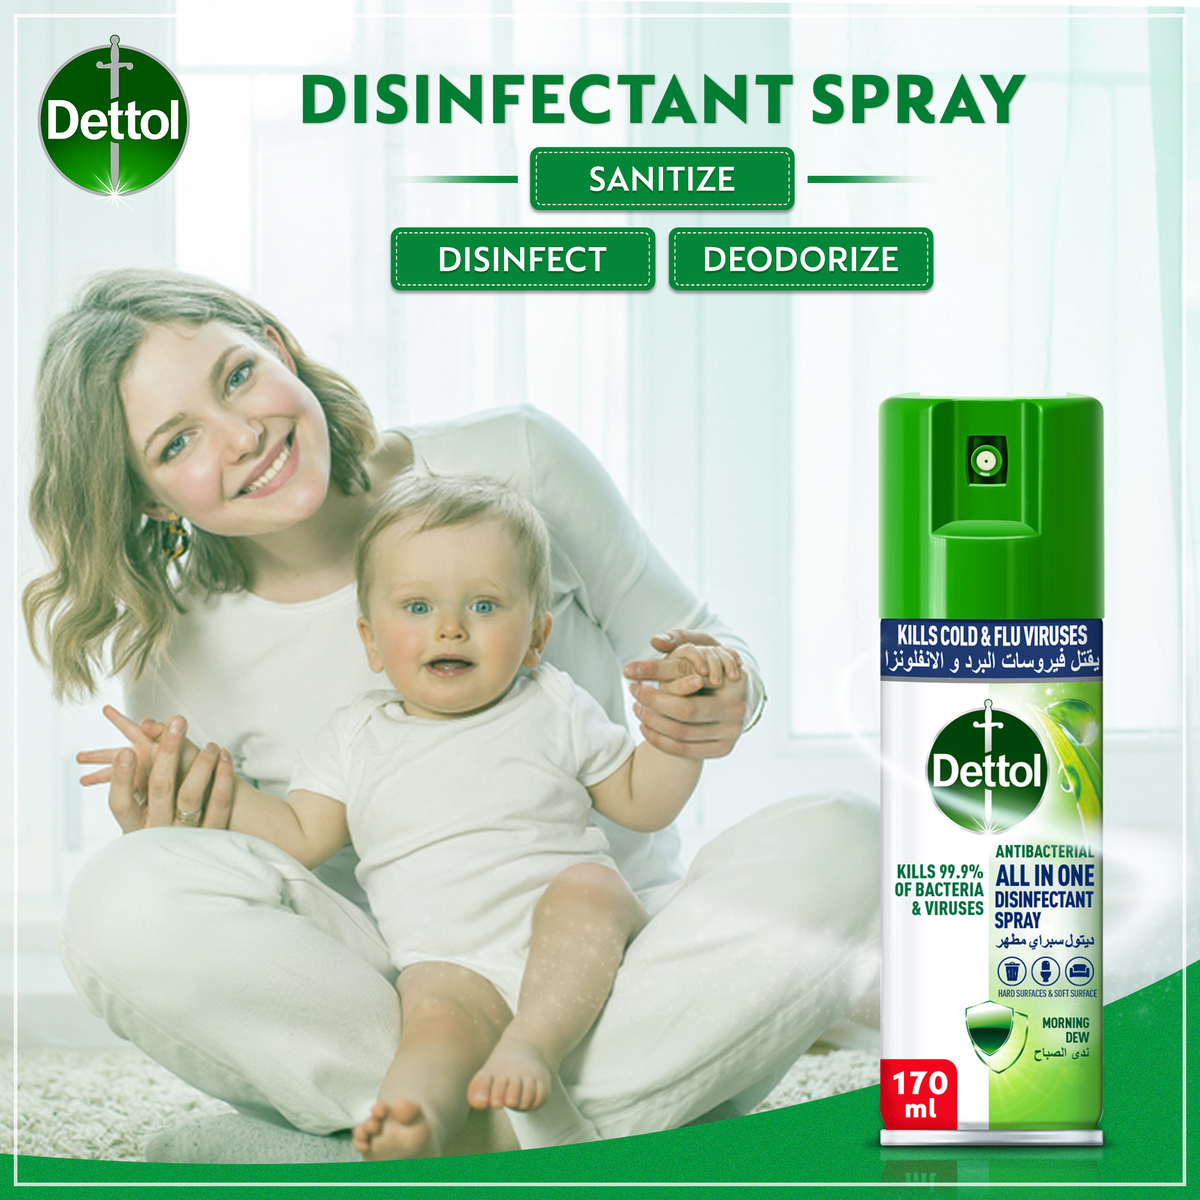 Dettol All In One Morning Dew Antibacterial Disinfectant Spray, 170 ml